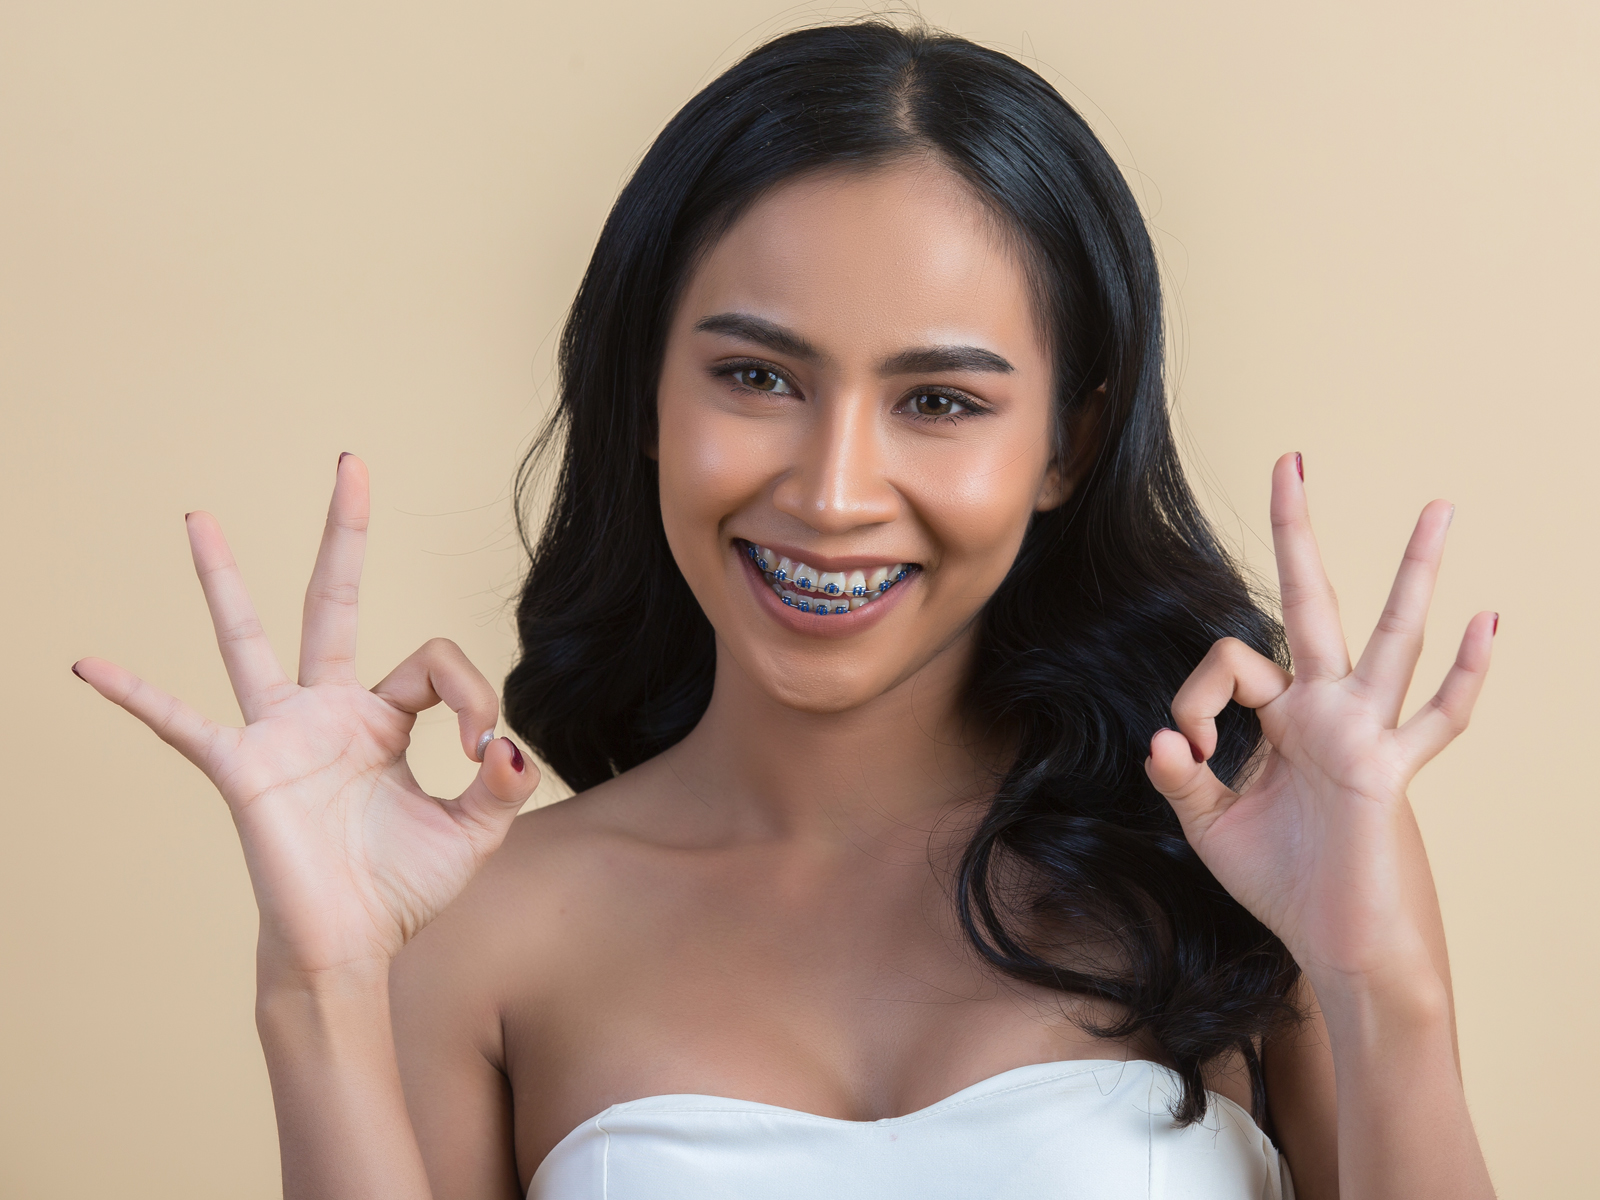 What Are The Benefits of Braces Besides Straight Teeth?